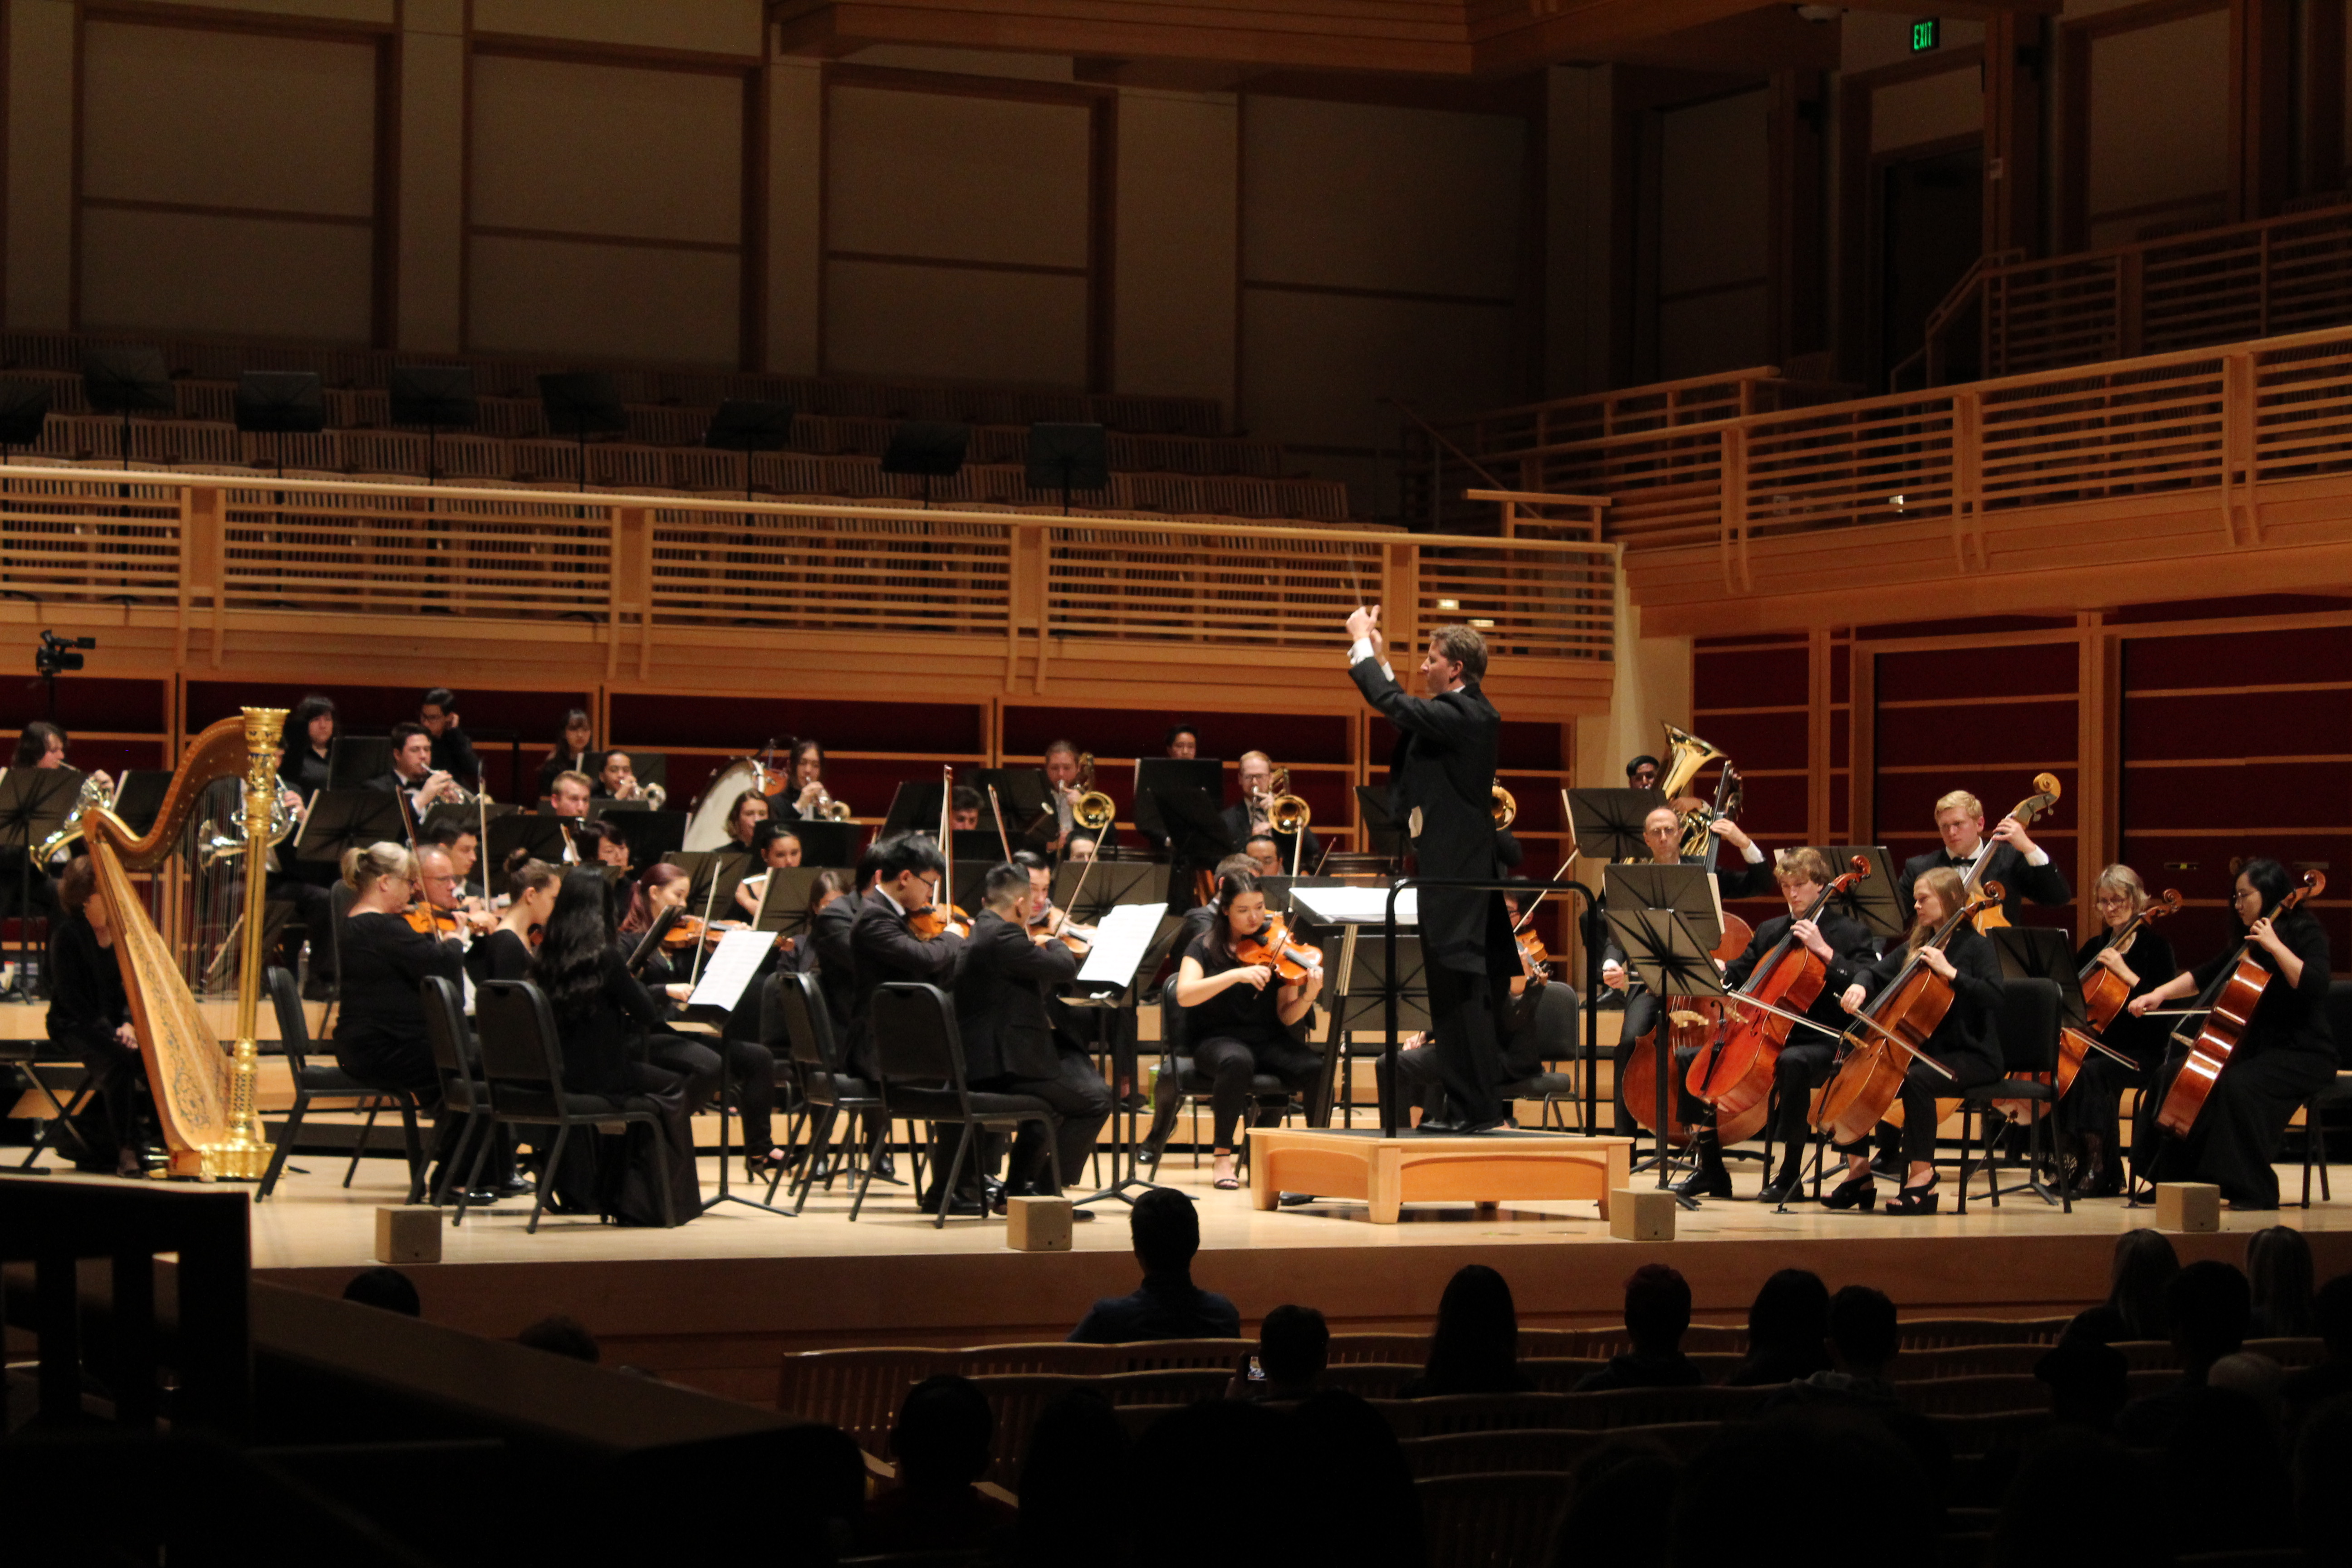 Symphony Orchestra performing onstage with Alexander Kahn conducting